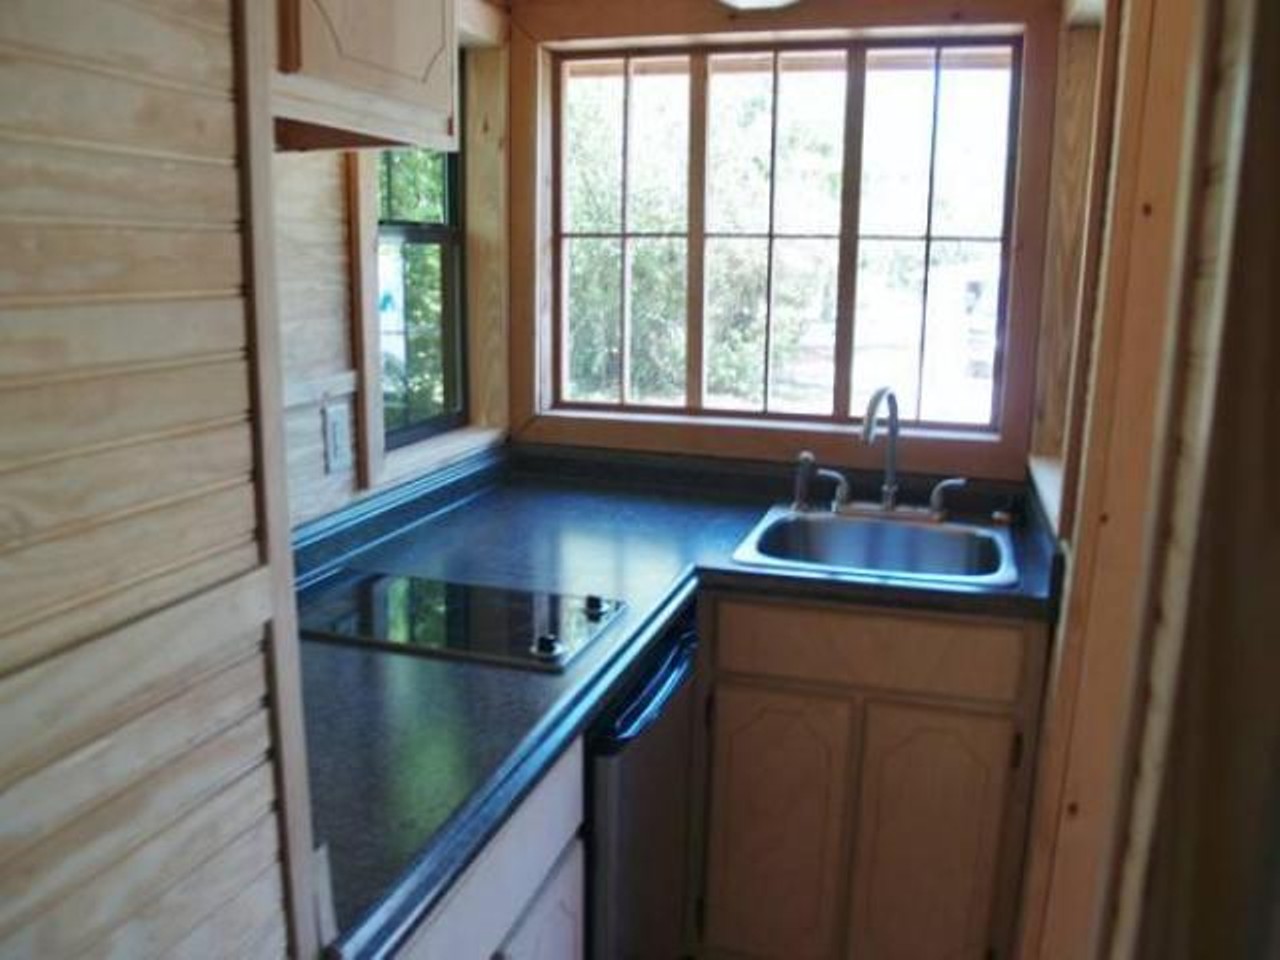 Tumbleweed Cypress 20
Price: $44000
Size: 144 sq ft 
Nice stainless steal sink.